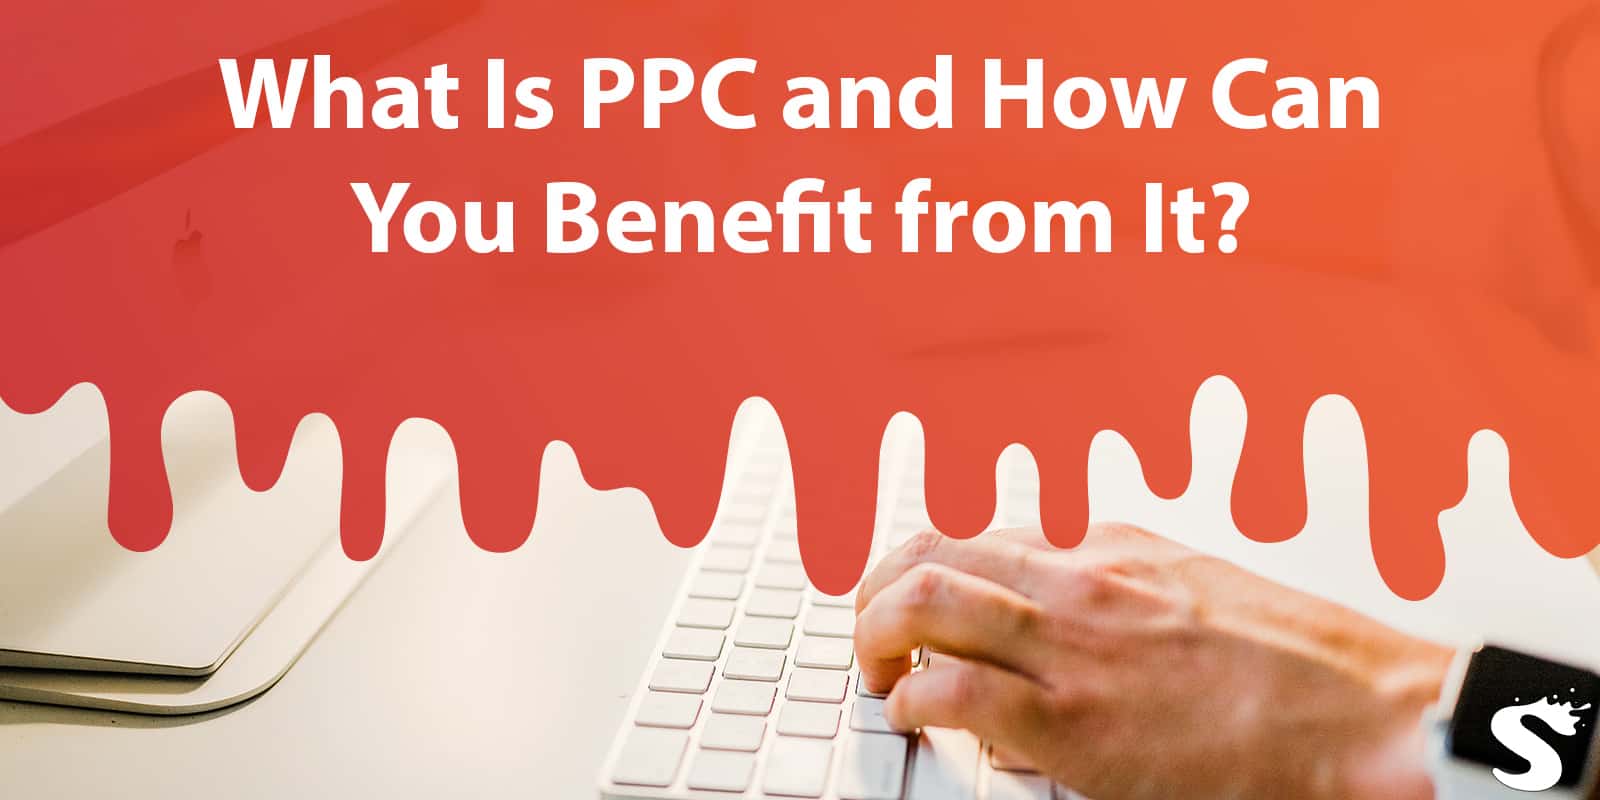 What Is PPC and How Can Your Business Benefit from It?